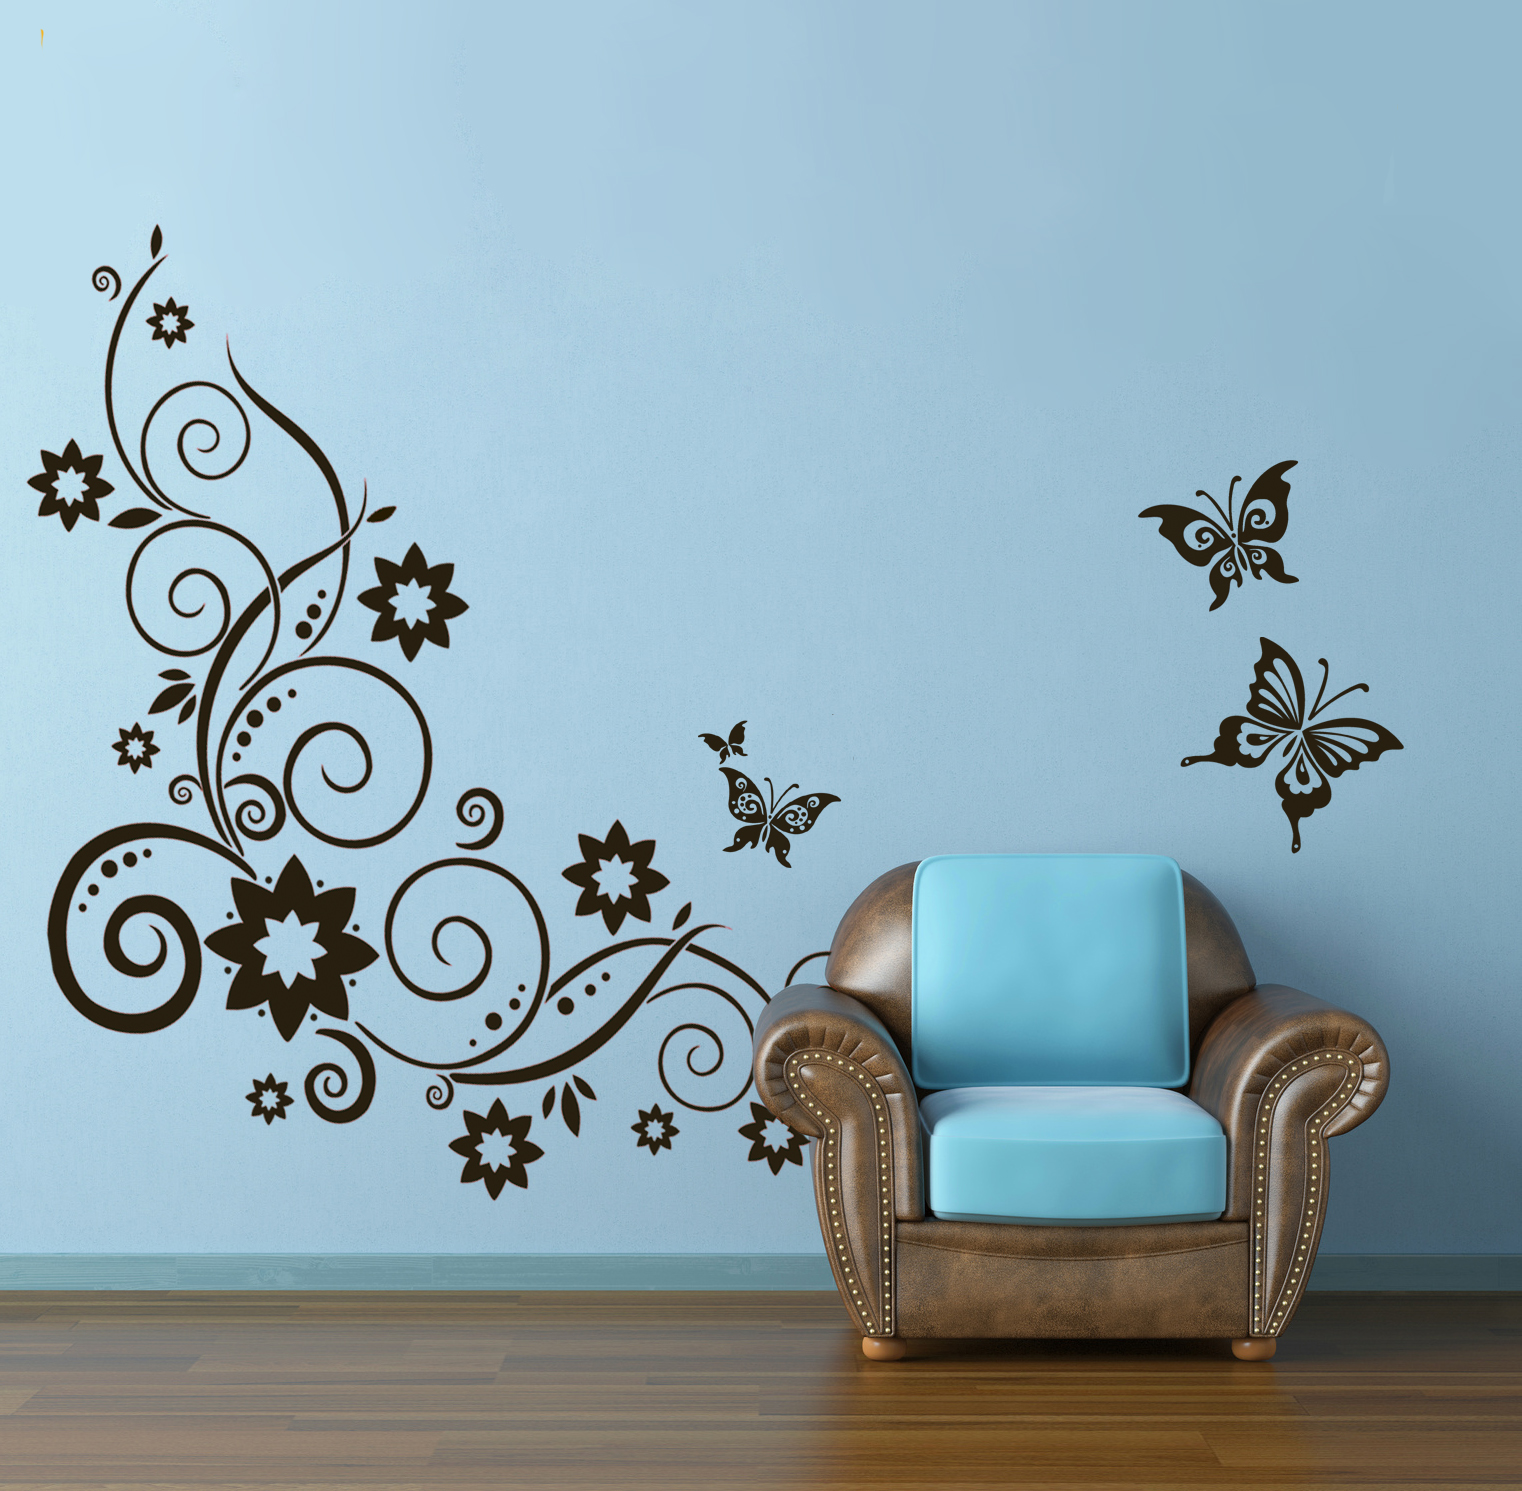 The 15 Most Beautiful Wall Stickers | MostBeautifulThings